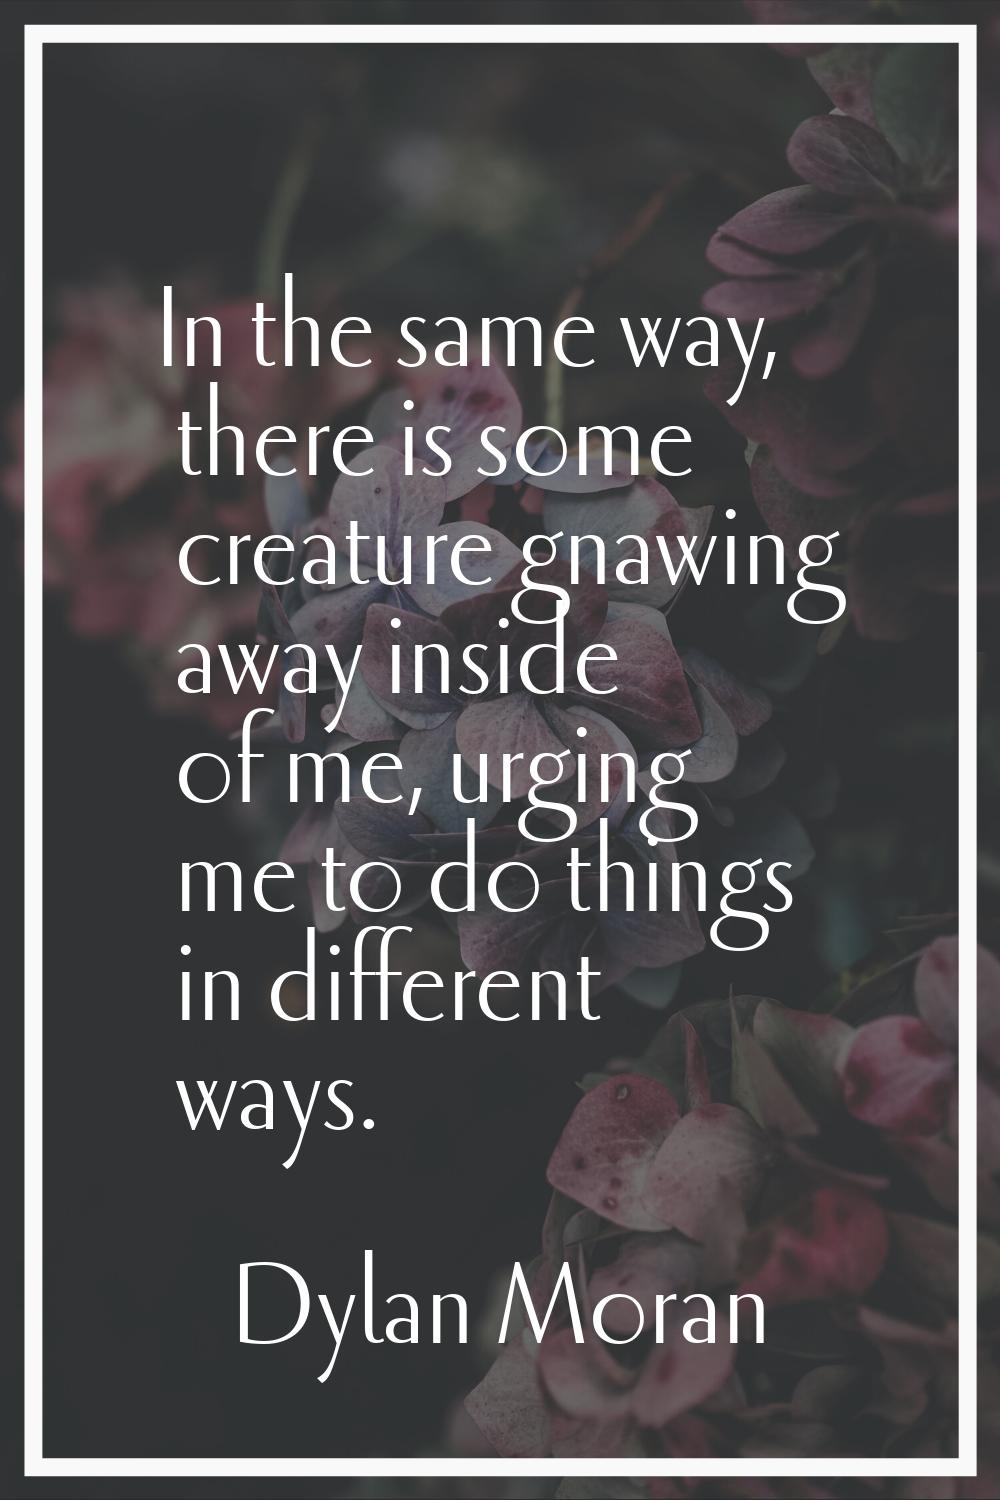 In the same way, there is some creature gnawing away inside of me, urging me to do things in differ